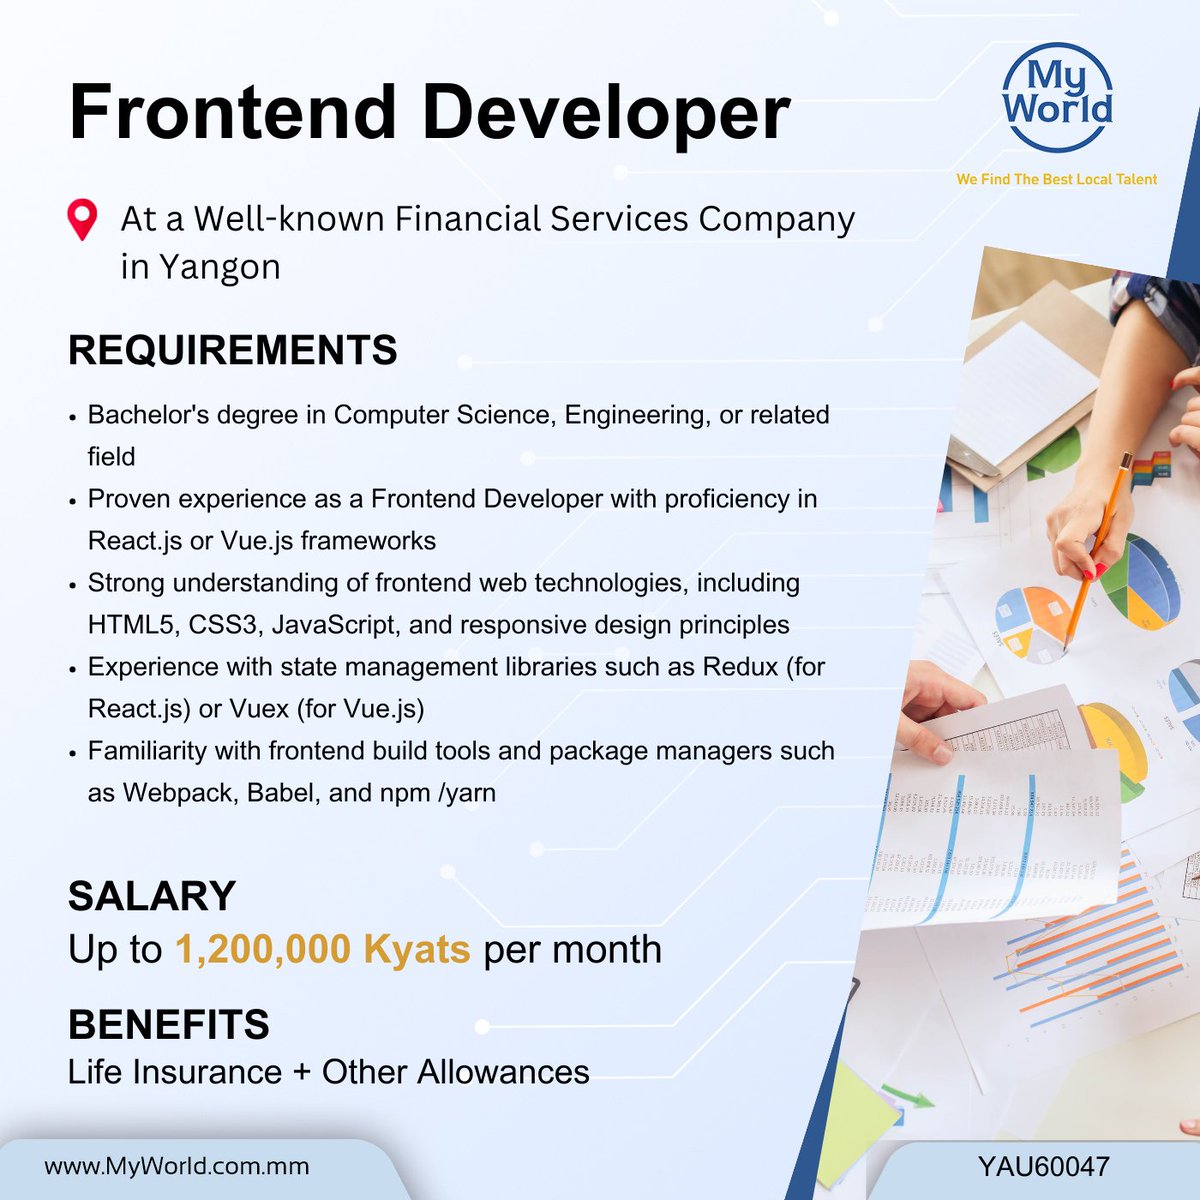 Hiring in #Yangon

Position - #FrontendDeveloper at a Well-known Financial Services Company 
Salary -   1,200,000 Ks  
#Job Link - tinyurl.com/3fh72rzc
Email - support@myworld-careers.com 

#vacancies #jobs #jobopportunity